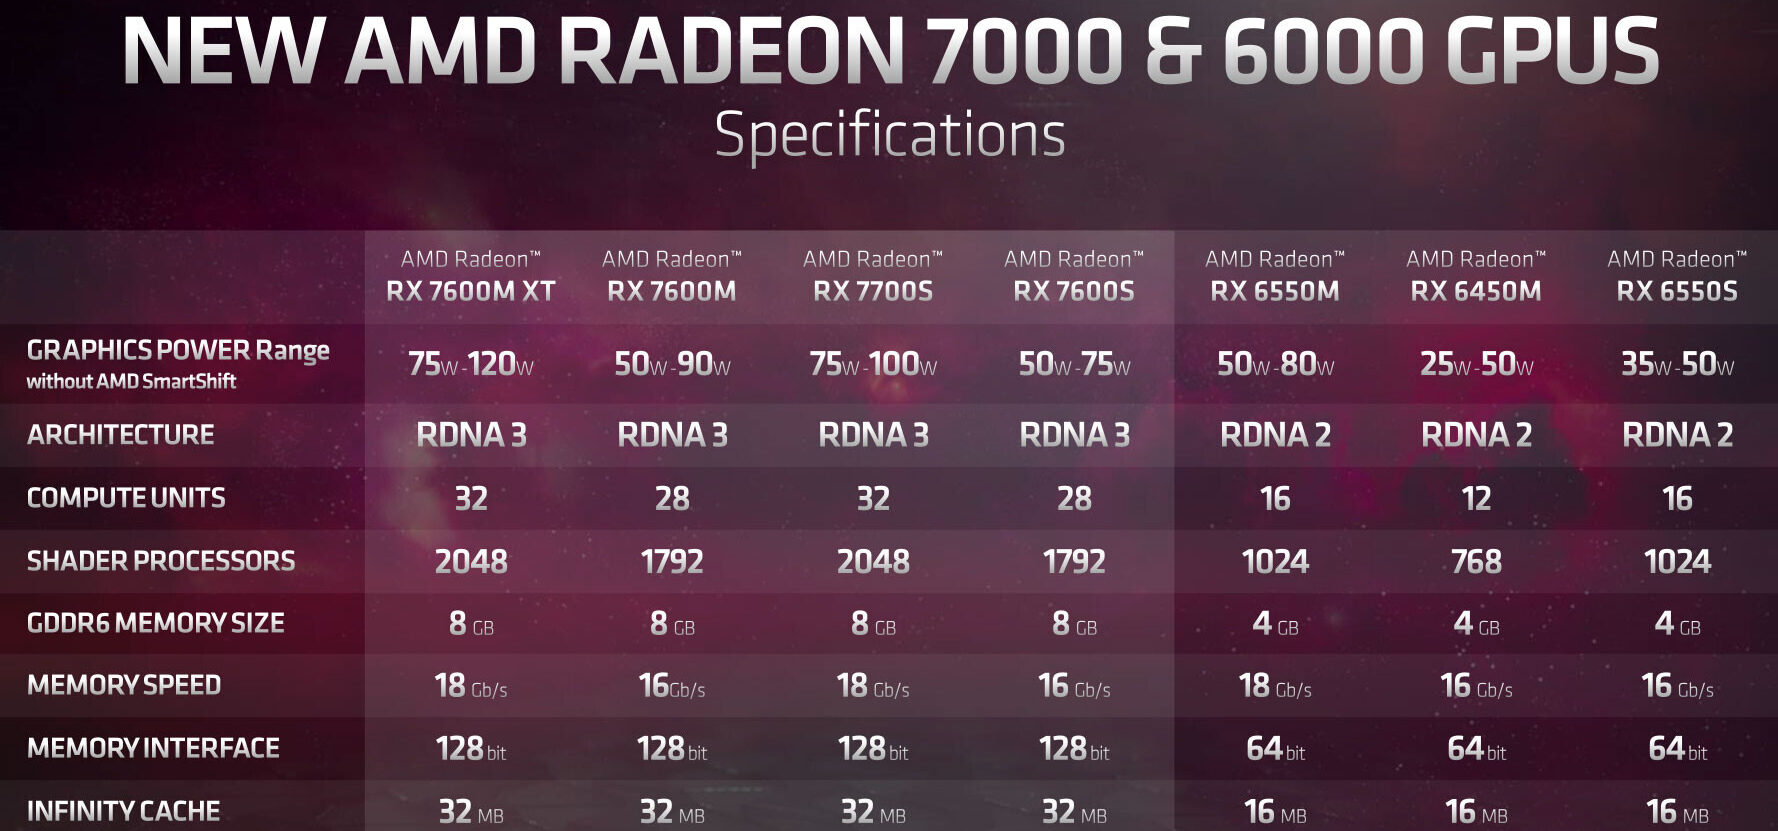 NVIDIA GeForce 40 Series vs AMD Radeon 7000 for Content Creation